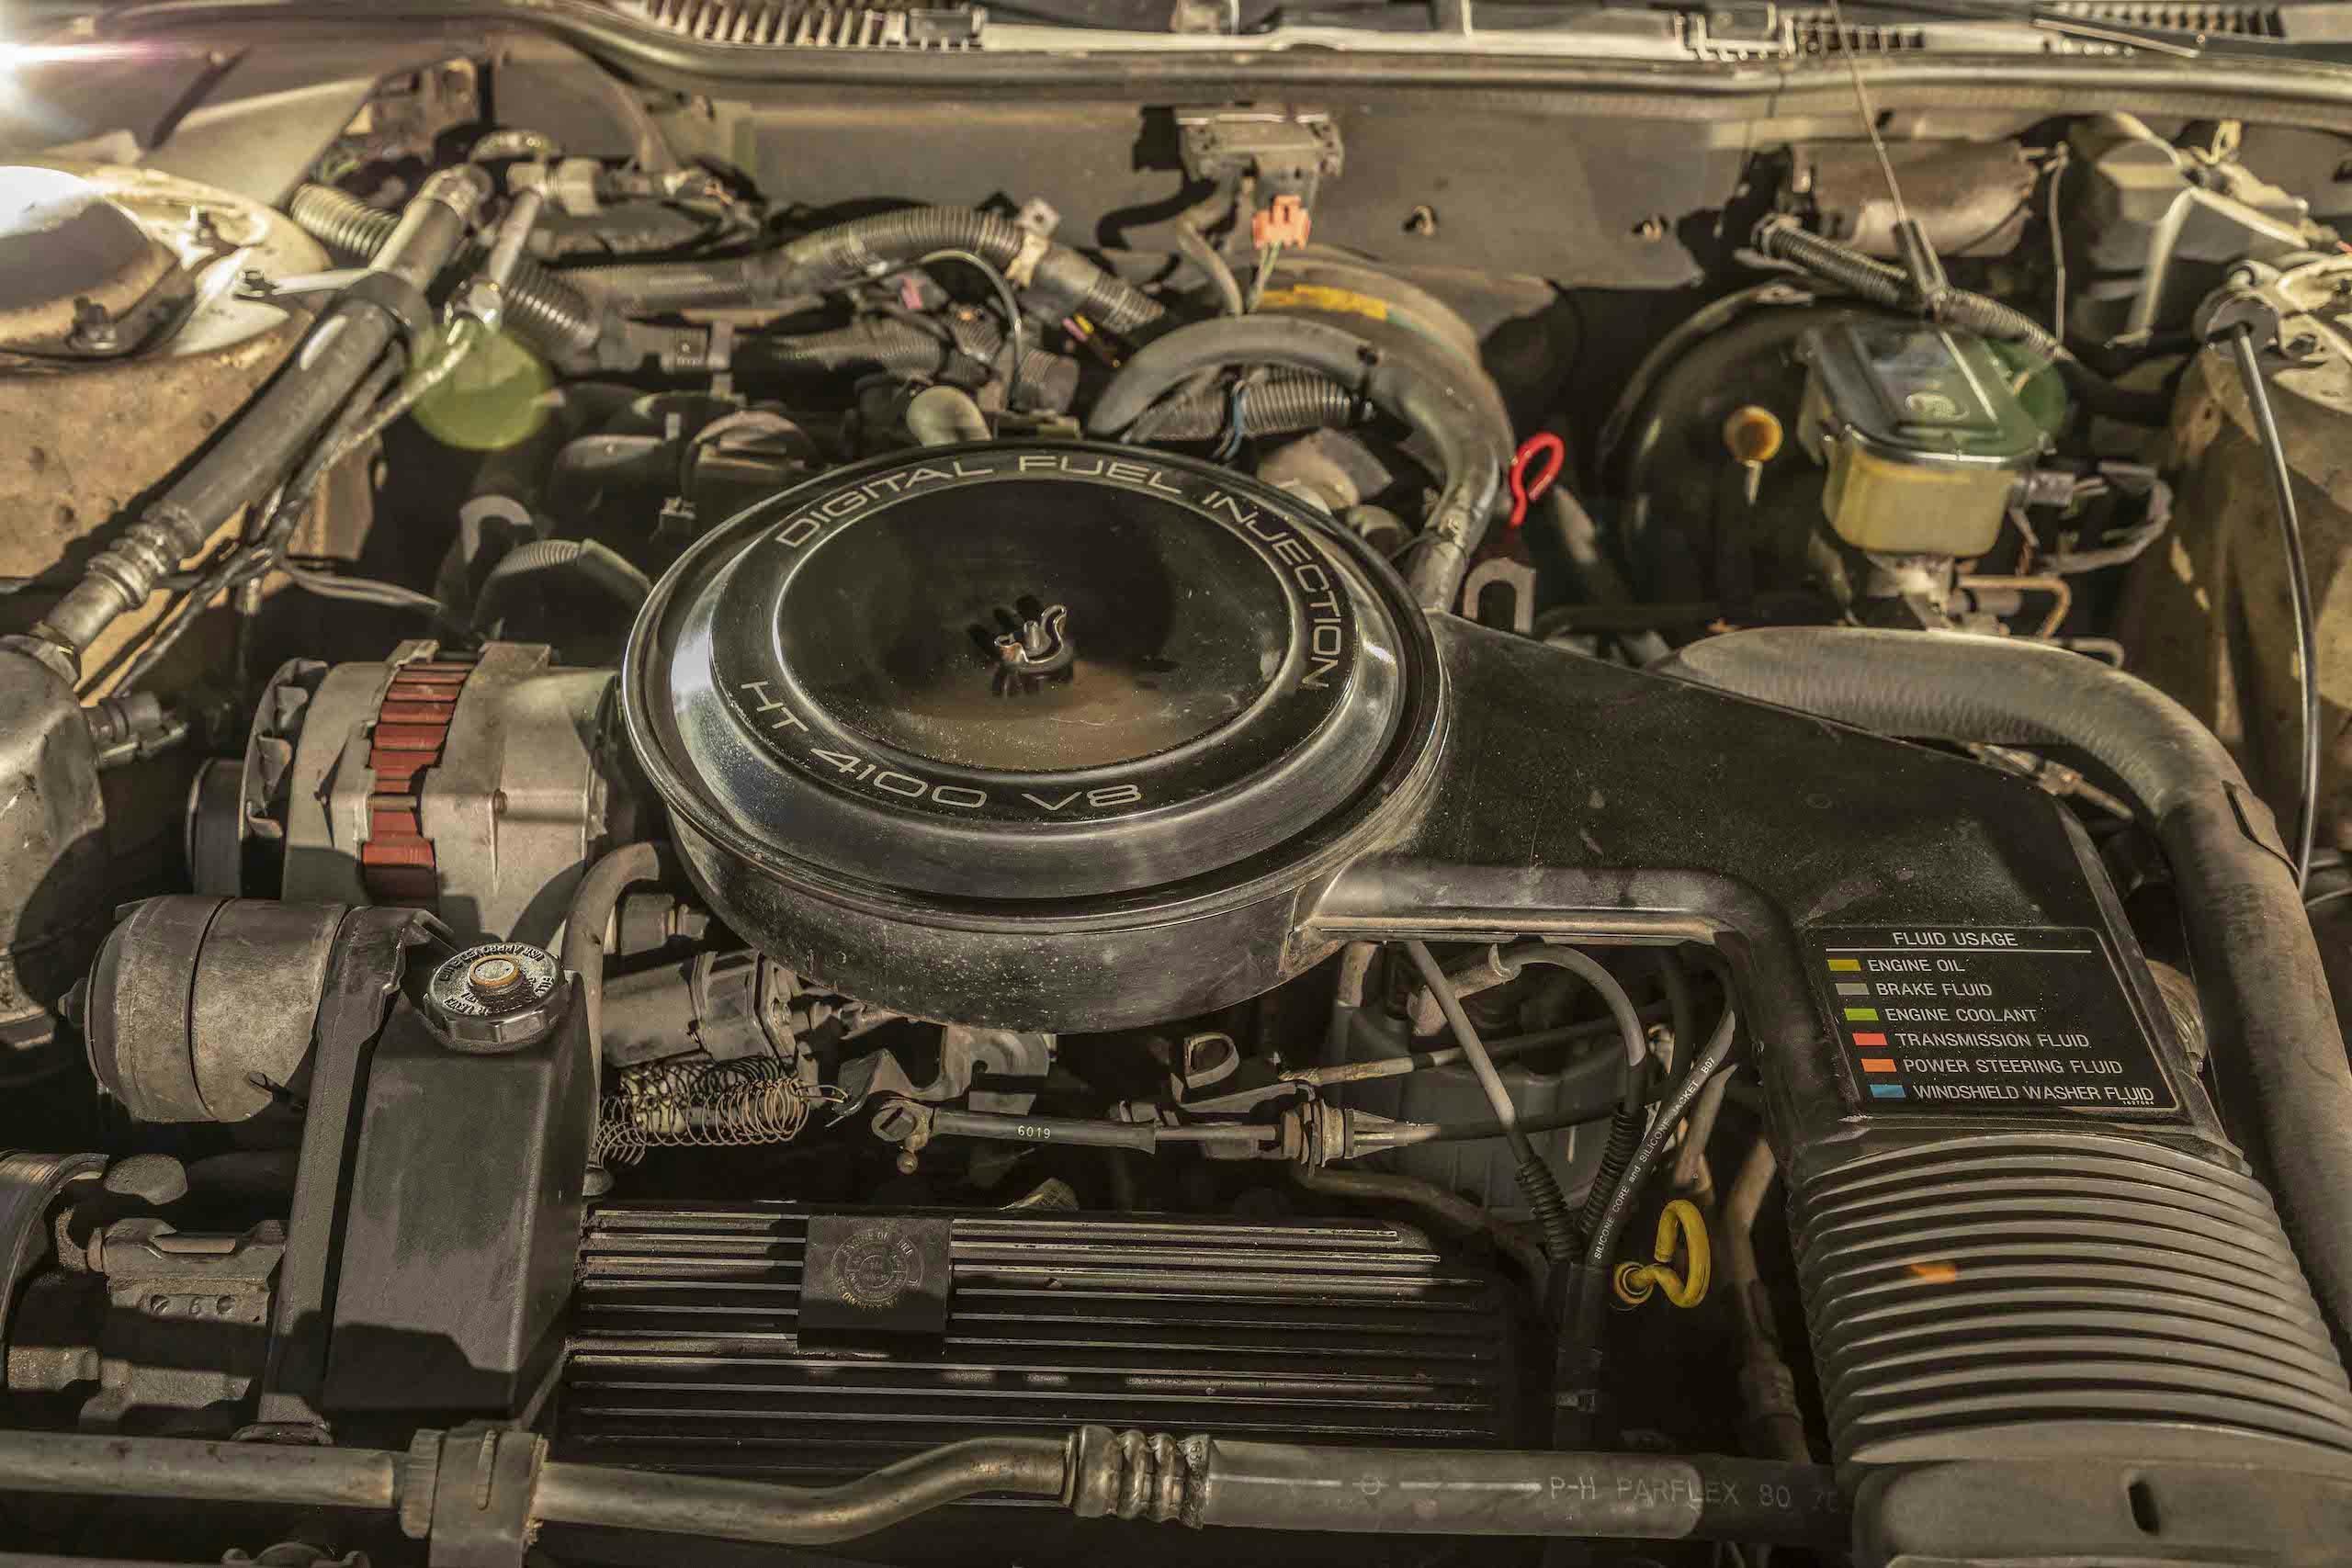 1986 Cadillac Coupe DeVille engine